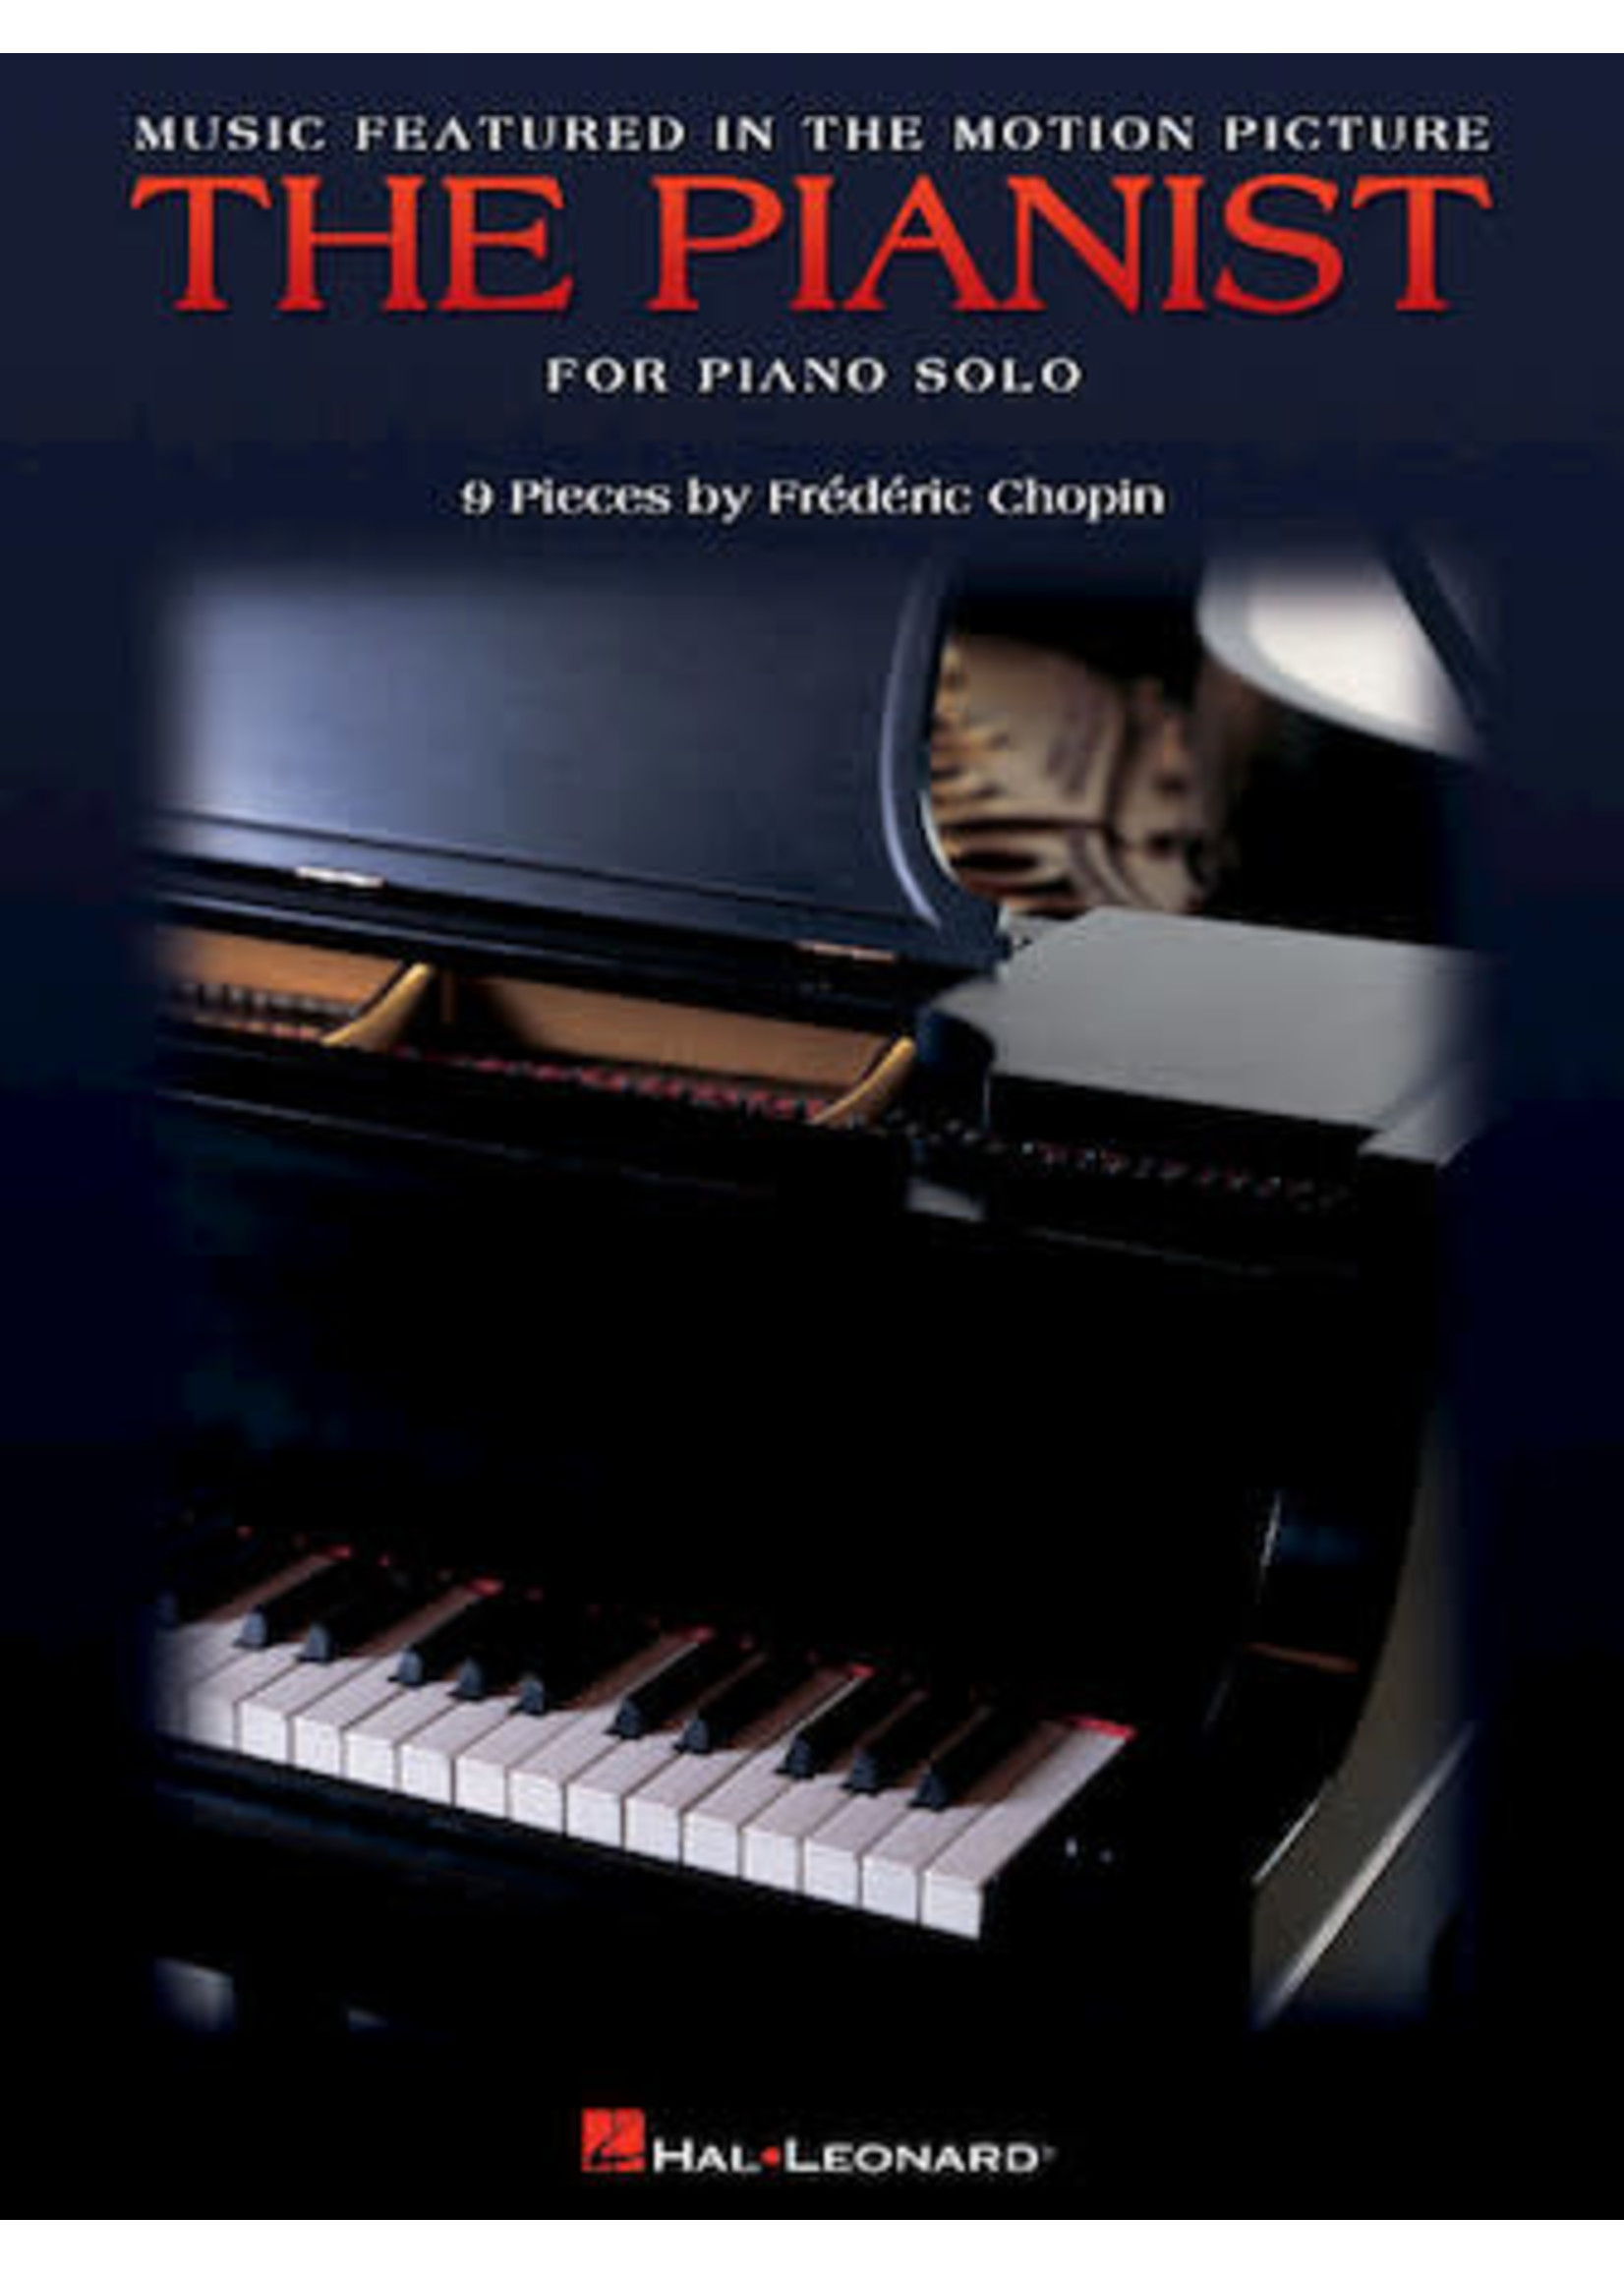 Hal Leonard Music Featured in the Motion Picture The Pianist